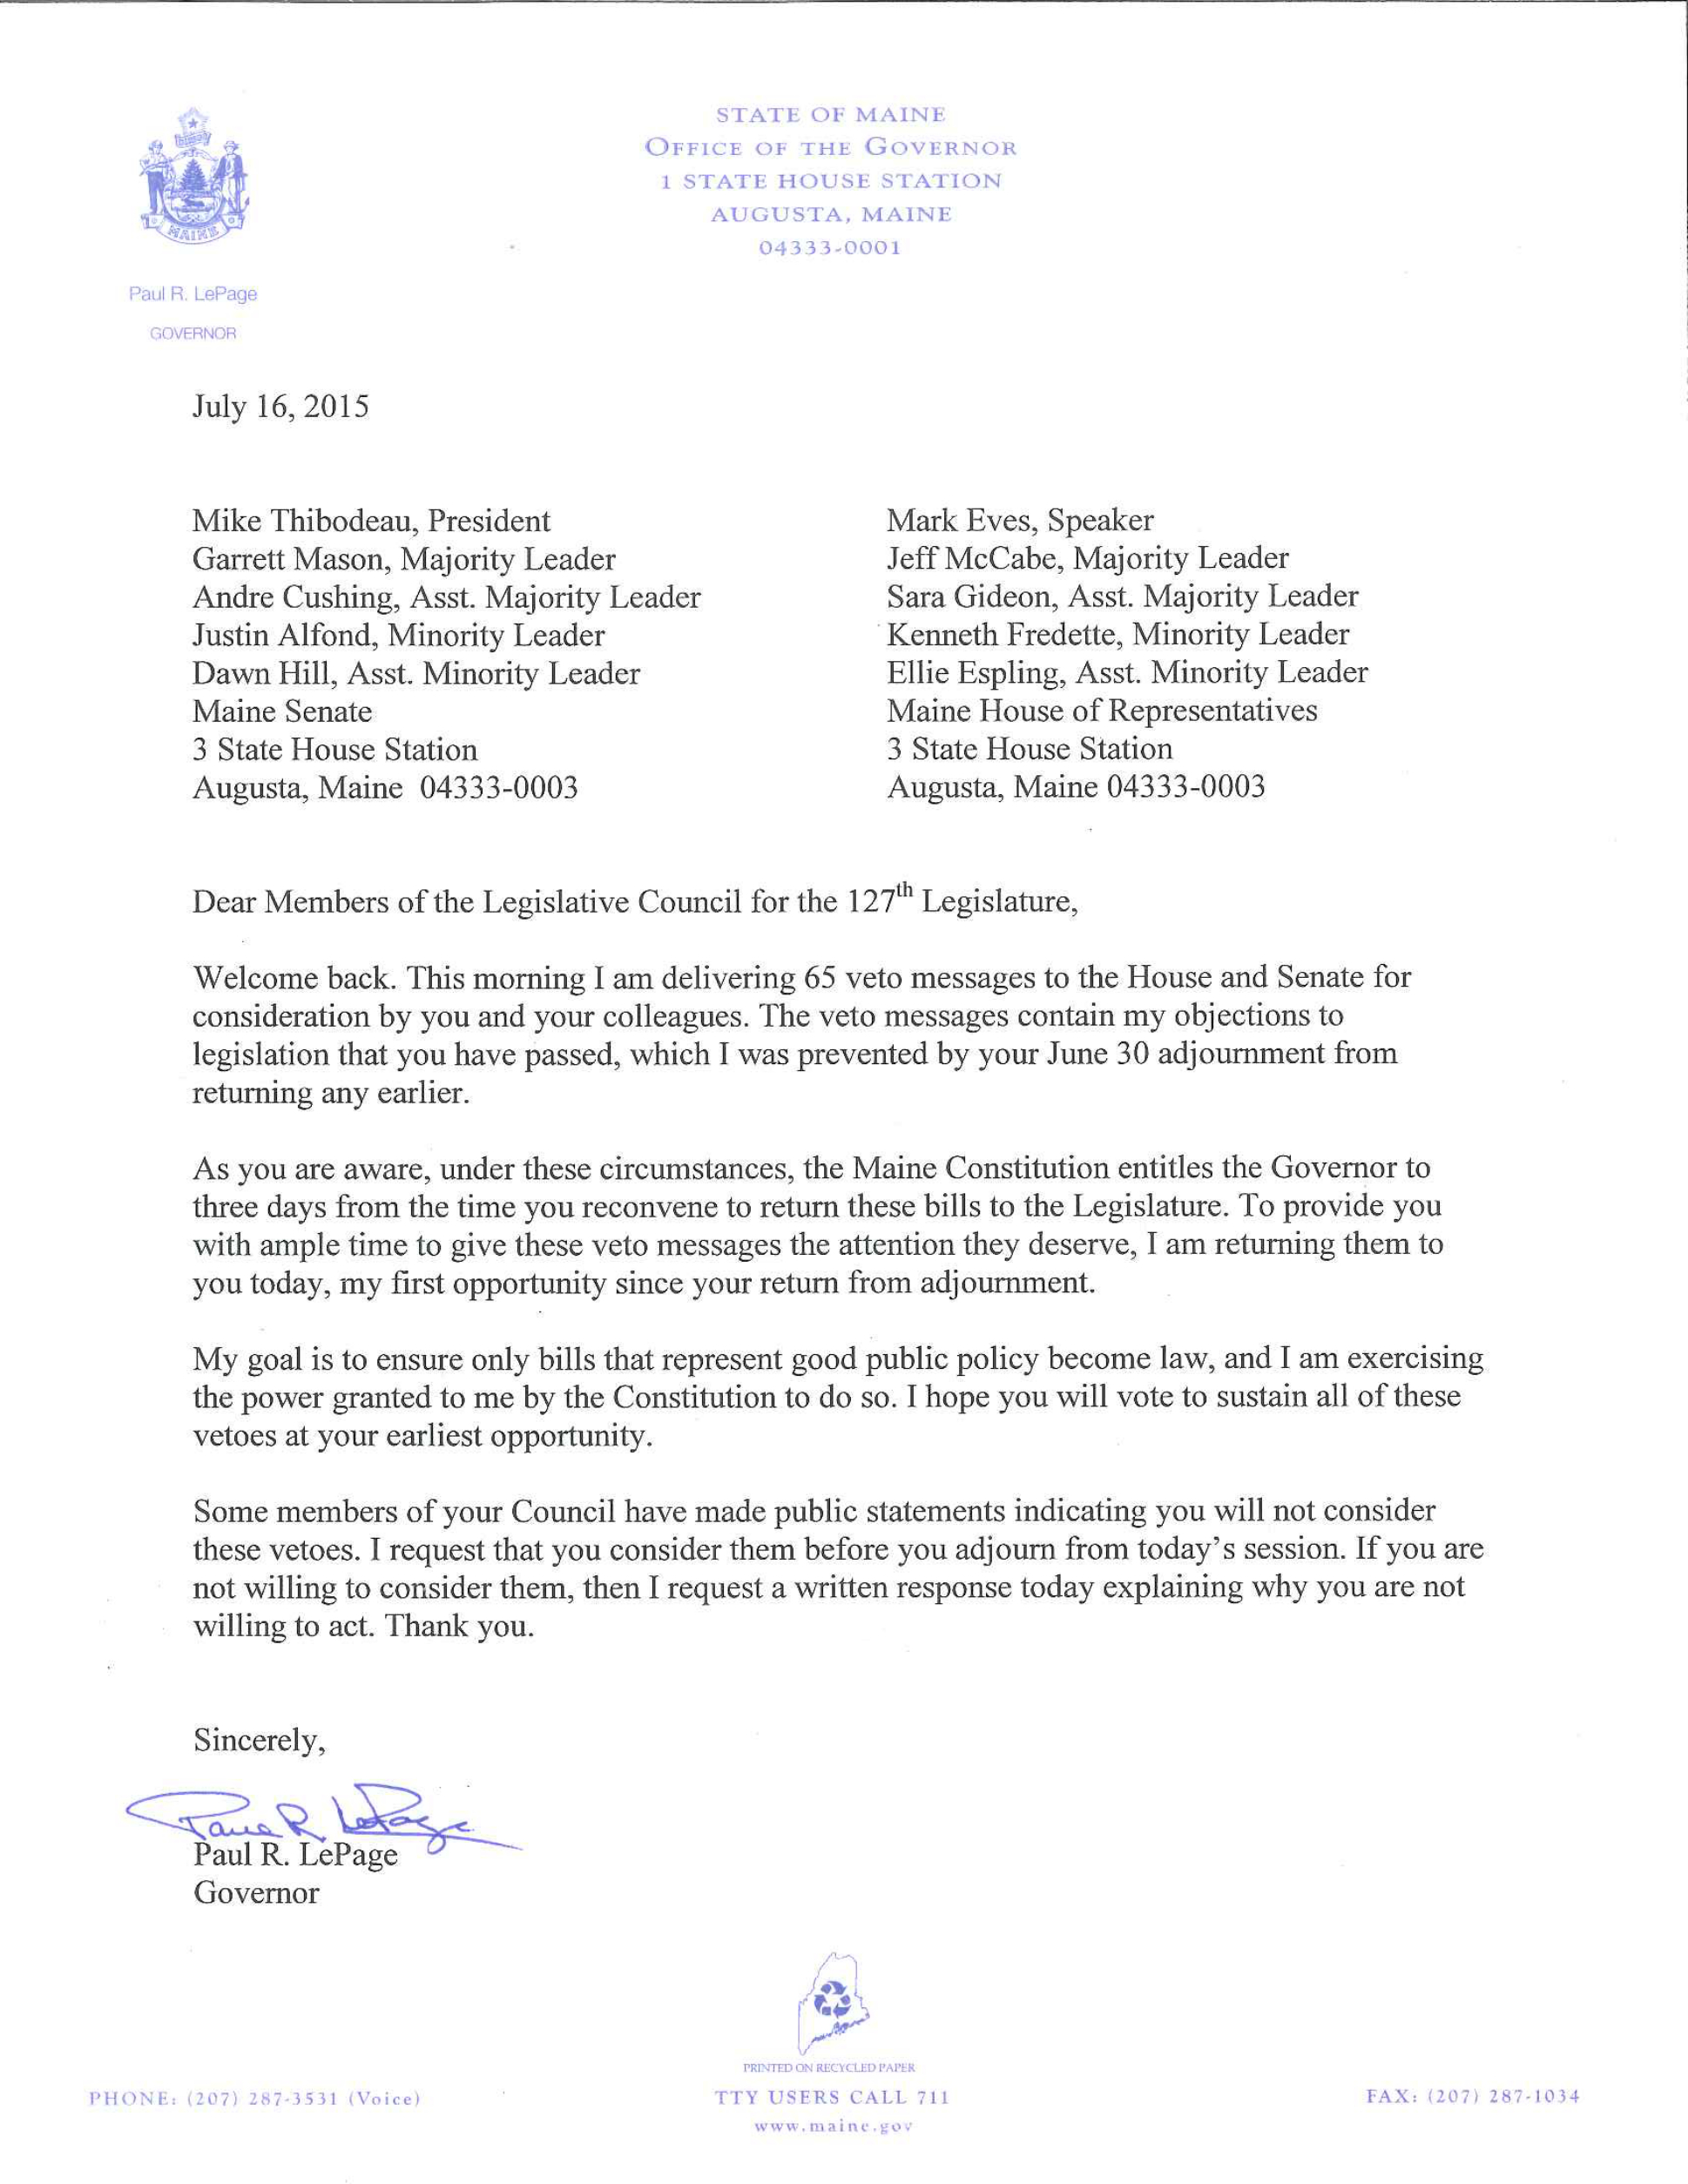 Governor's Letter to Legislative Council RE 65 Vetoes 7.16.15